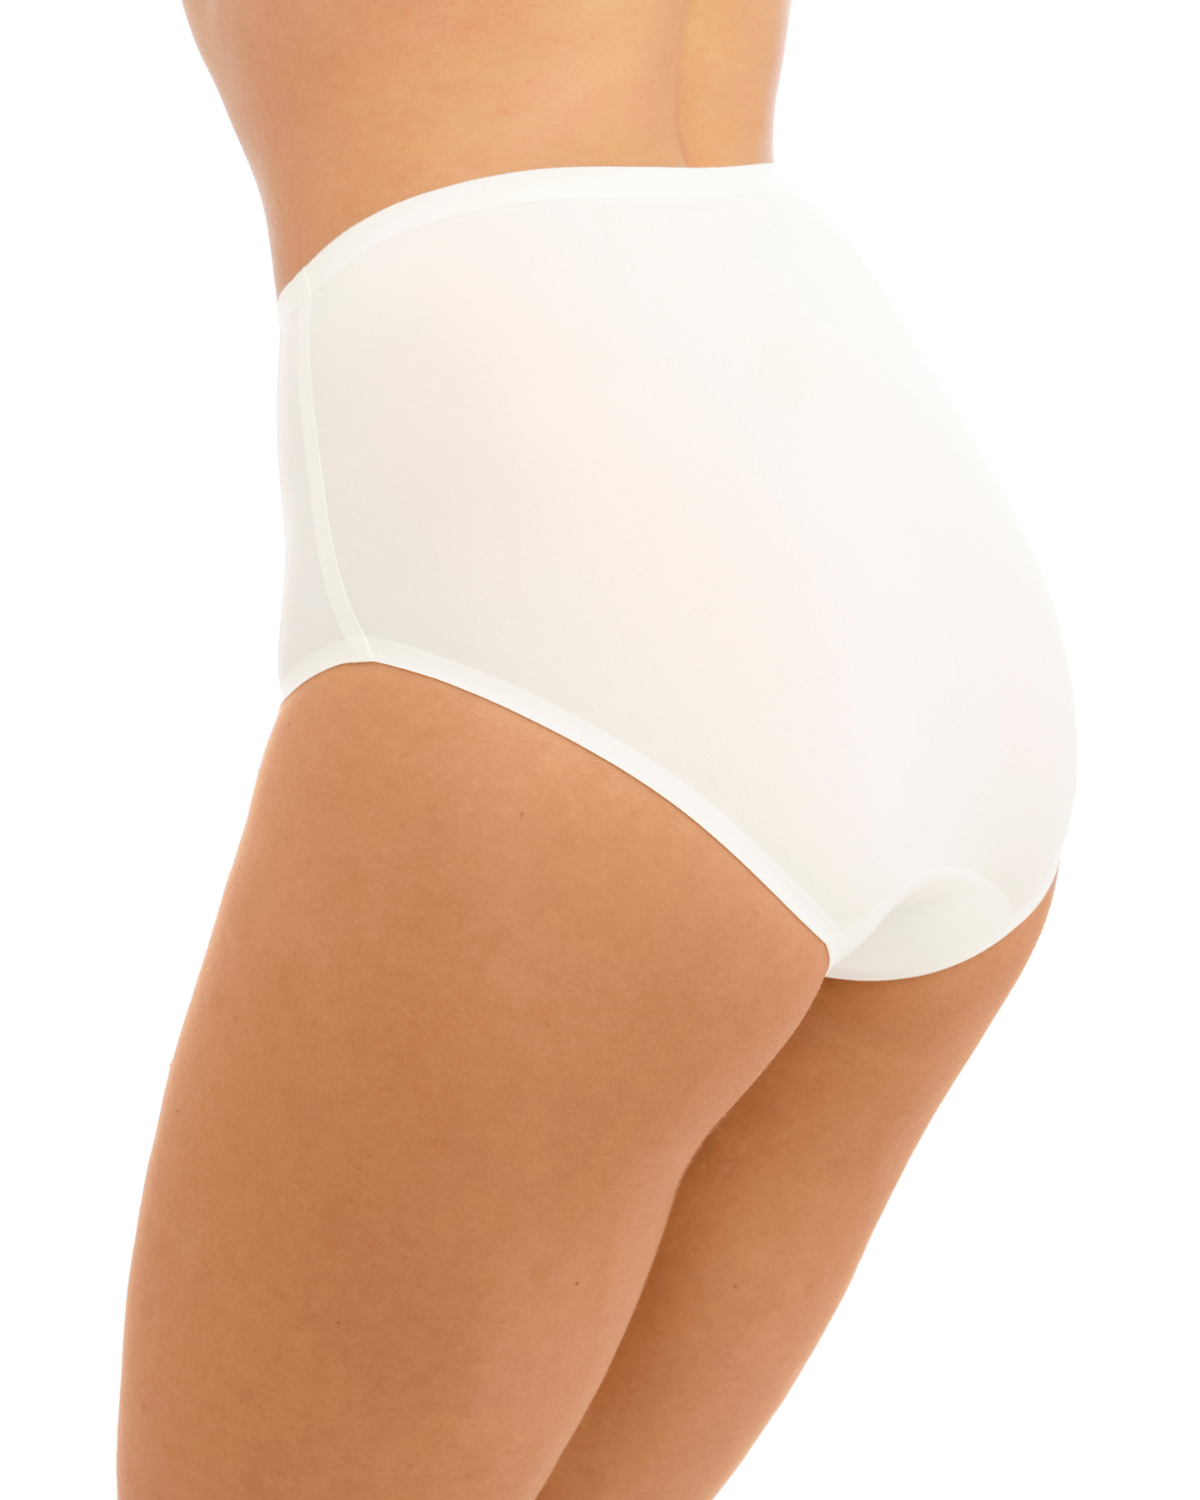 Model wearing a seamless stretch full brief in white